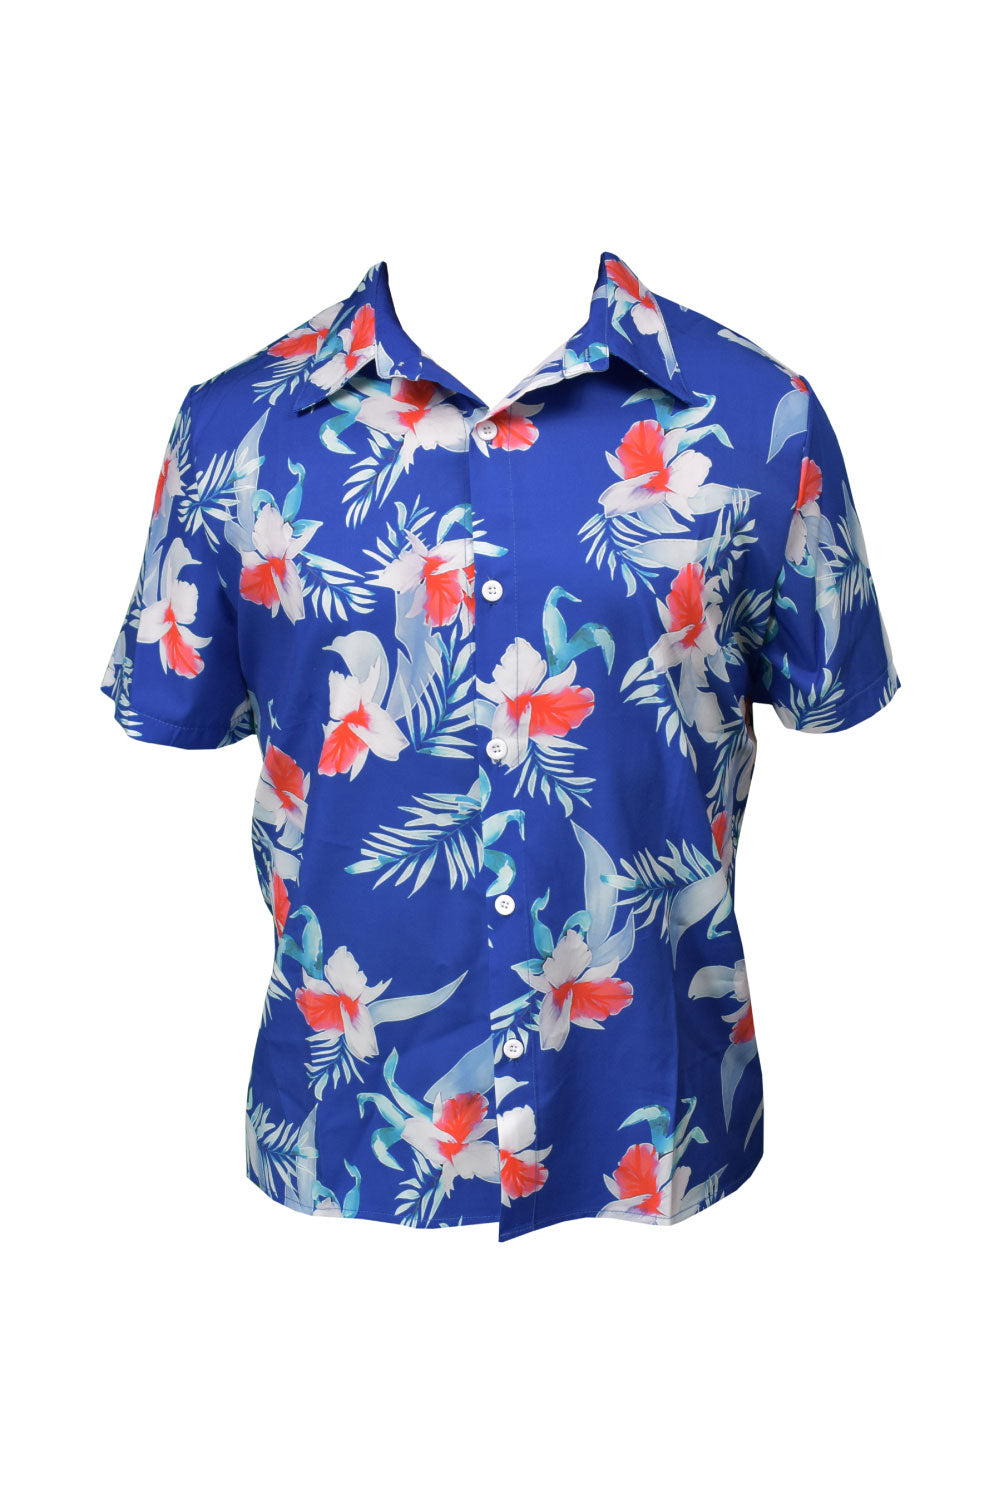 Image of the front of the Blue and Pink Hawaiian Men's Shirt.